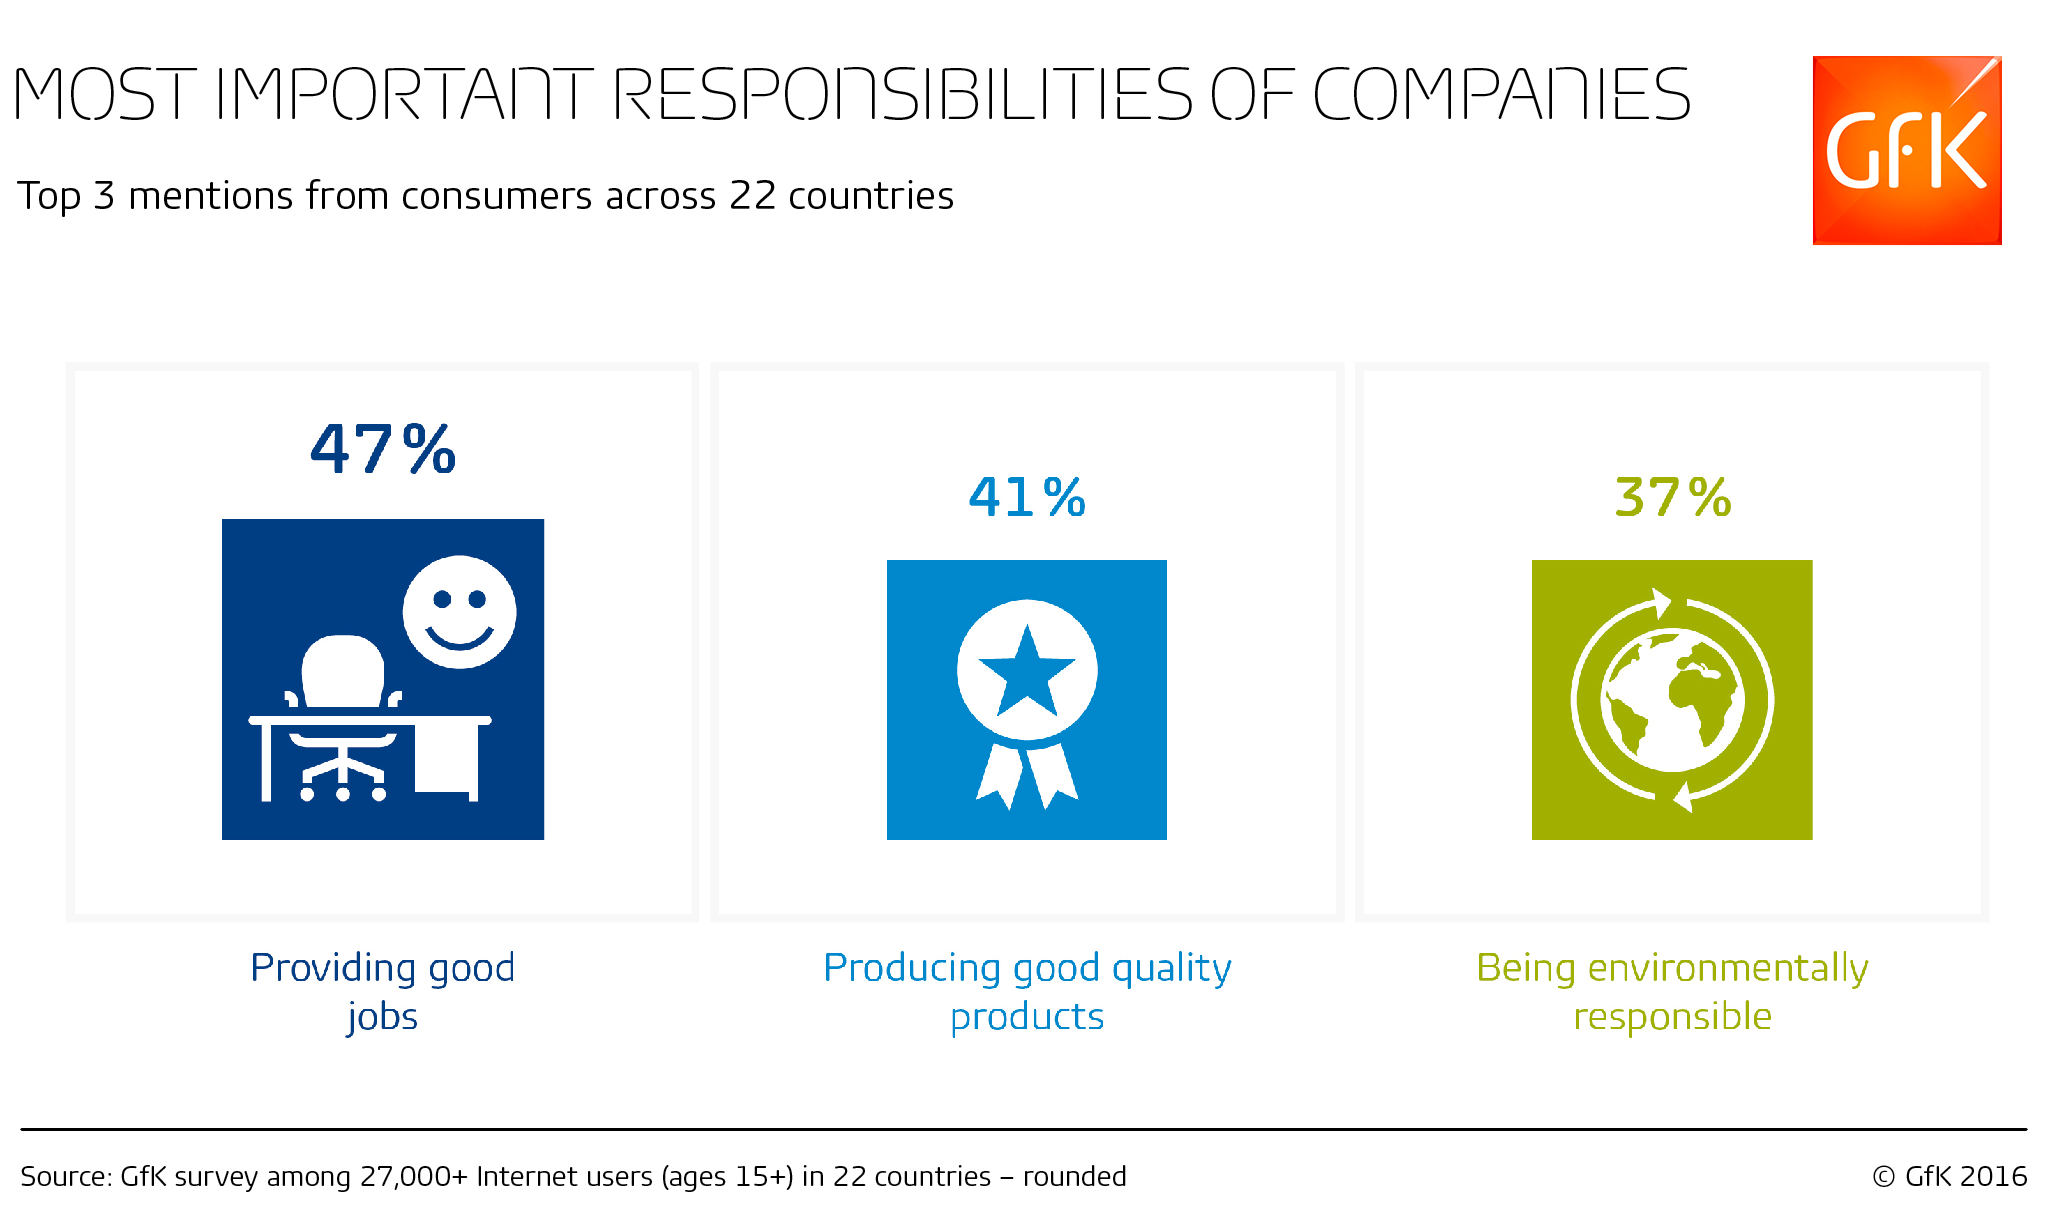     47% - providing good jobs for people     41% - producing good quality products or services     37% - being environmentally responsible